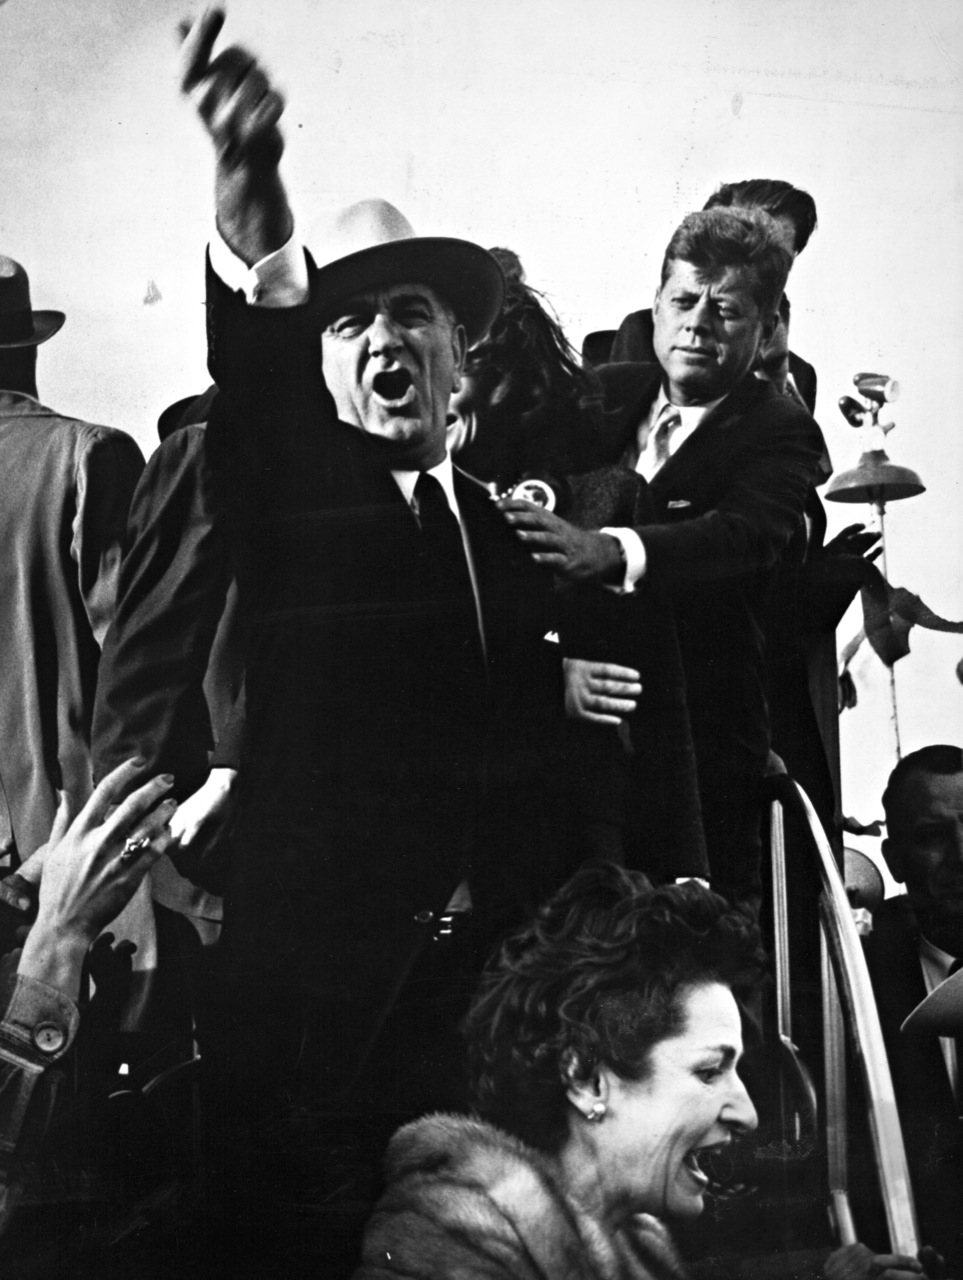 Lyndon B. Johnson yelling at the pilots of a nearby plane to cut their engines so that John F. Kennedy could speak as Kennedy is seen trying to calm him down. Taken during the 1960 presidential campaign in Amarillo, Texas